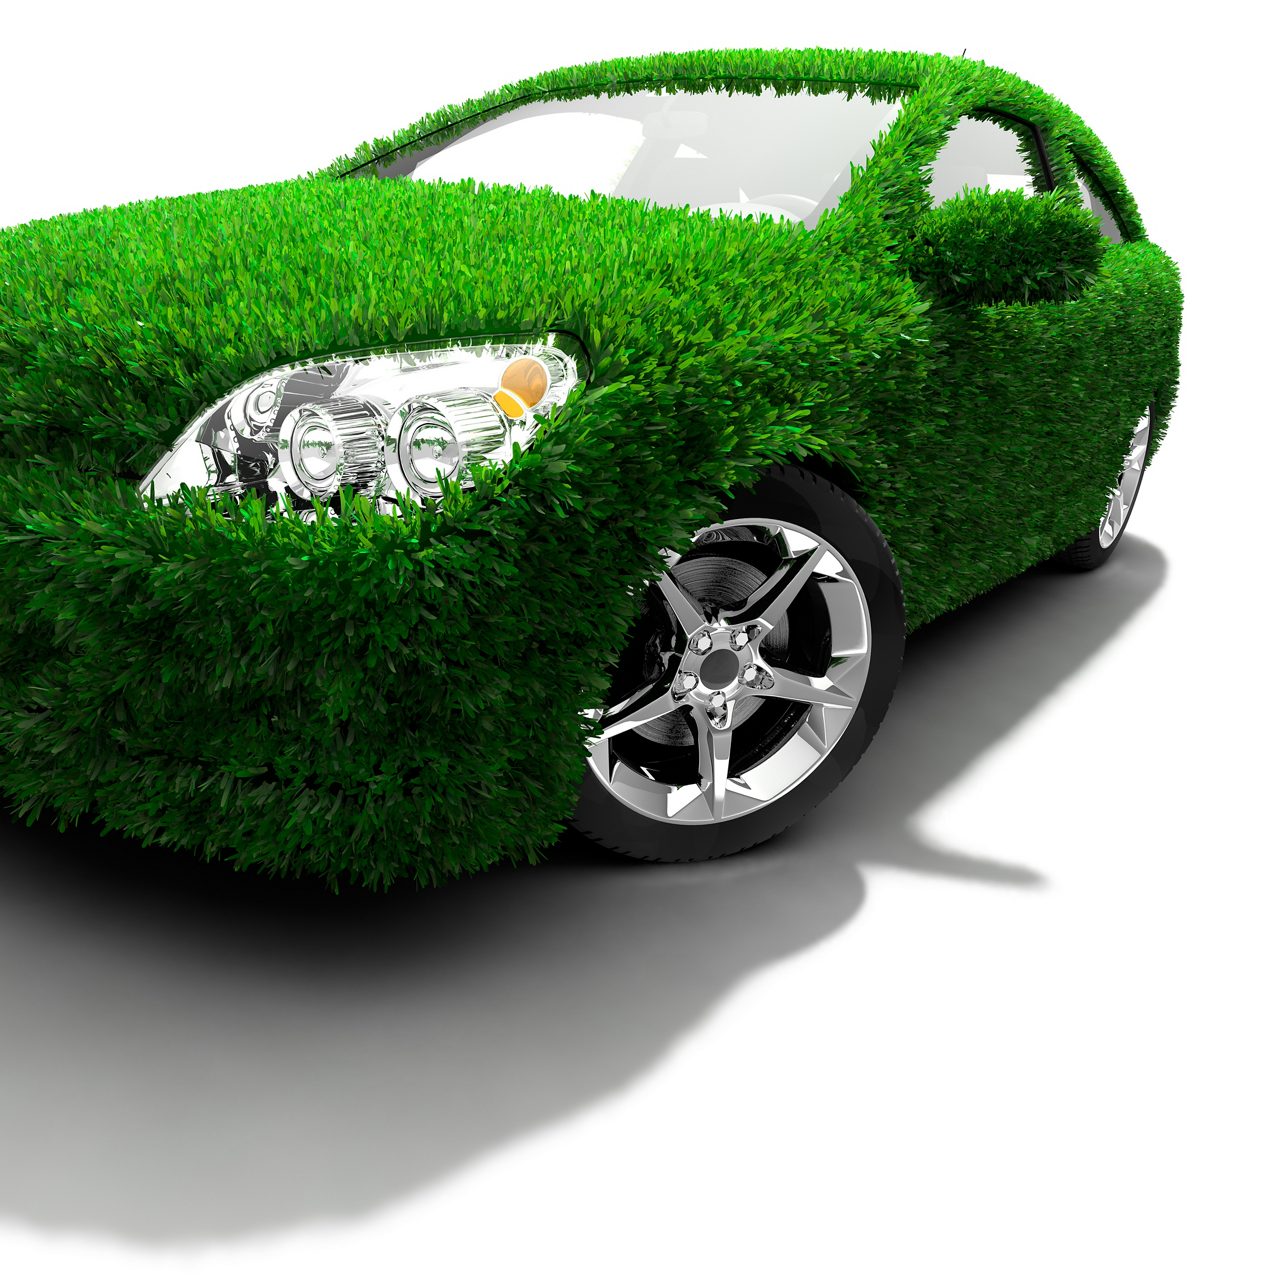 Concept of the eco-friendly car - body surface is covered with a realistic grass; Shutterstock ID 65603182; PO: redownload; Job: redownload; Client: redownload; Other: redownload